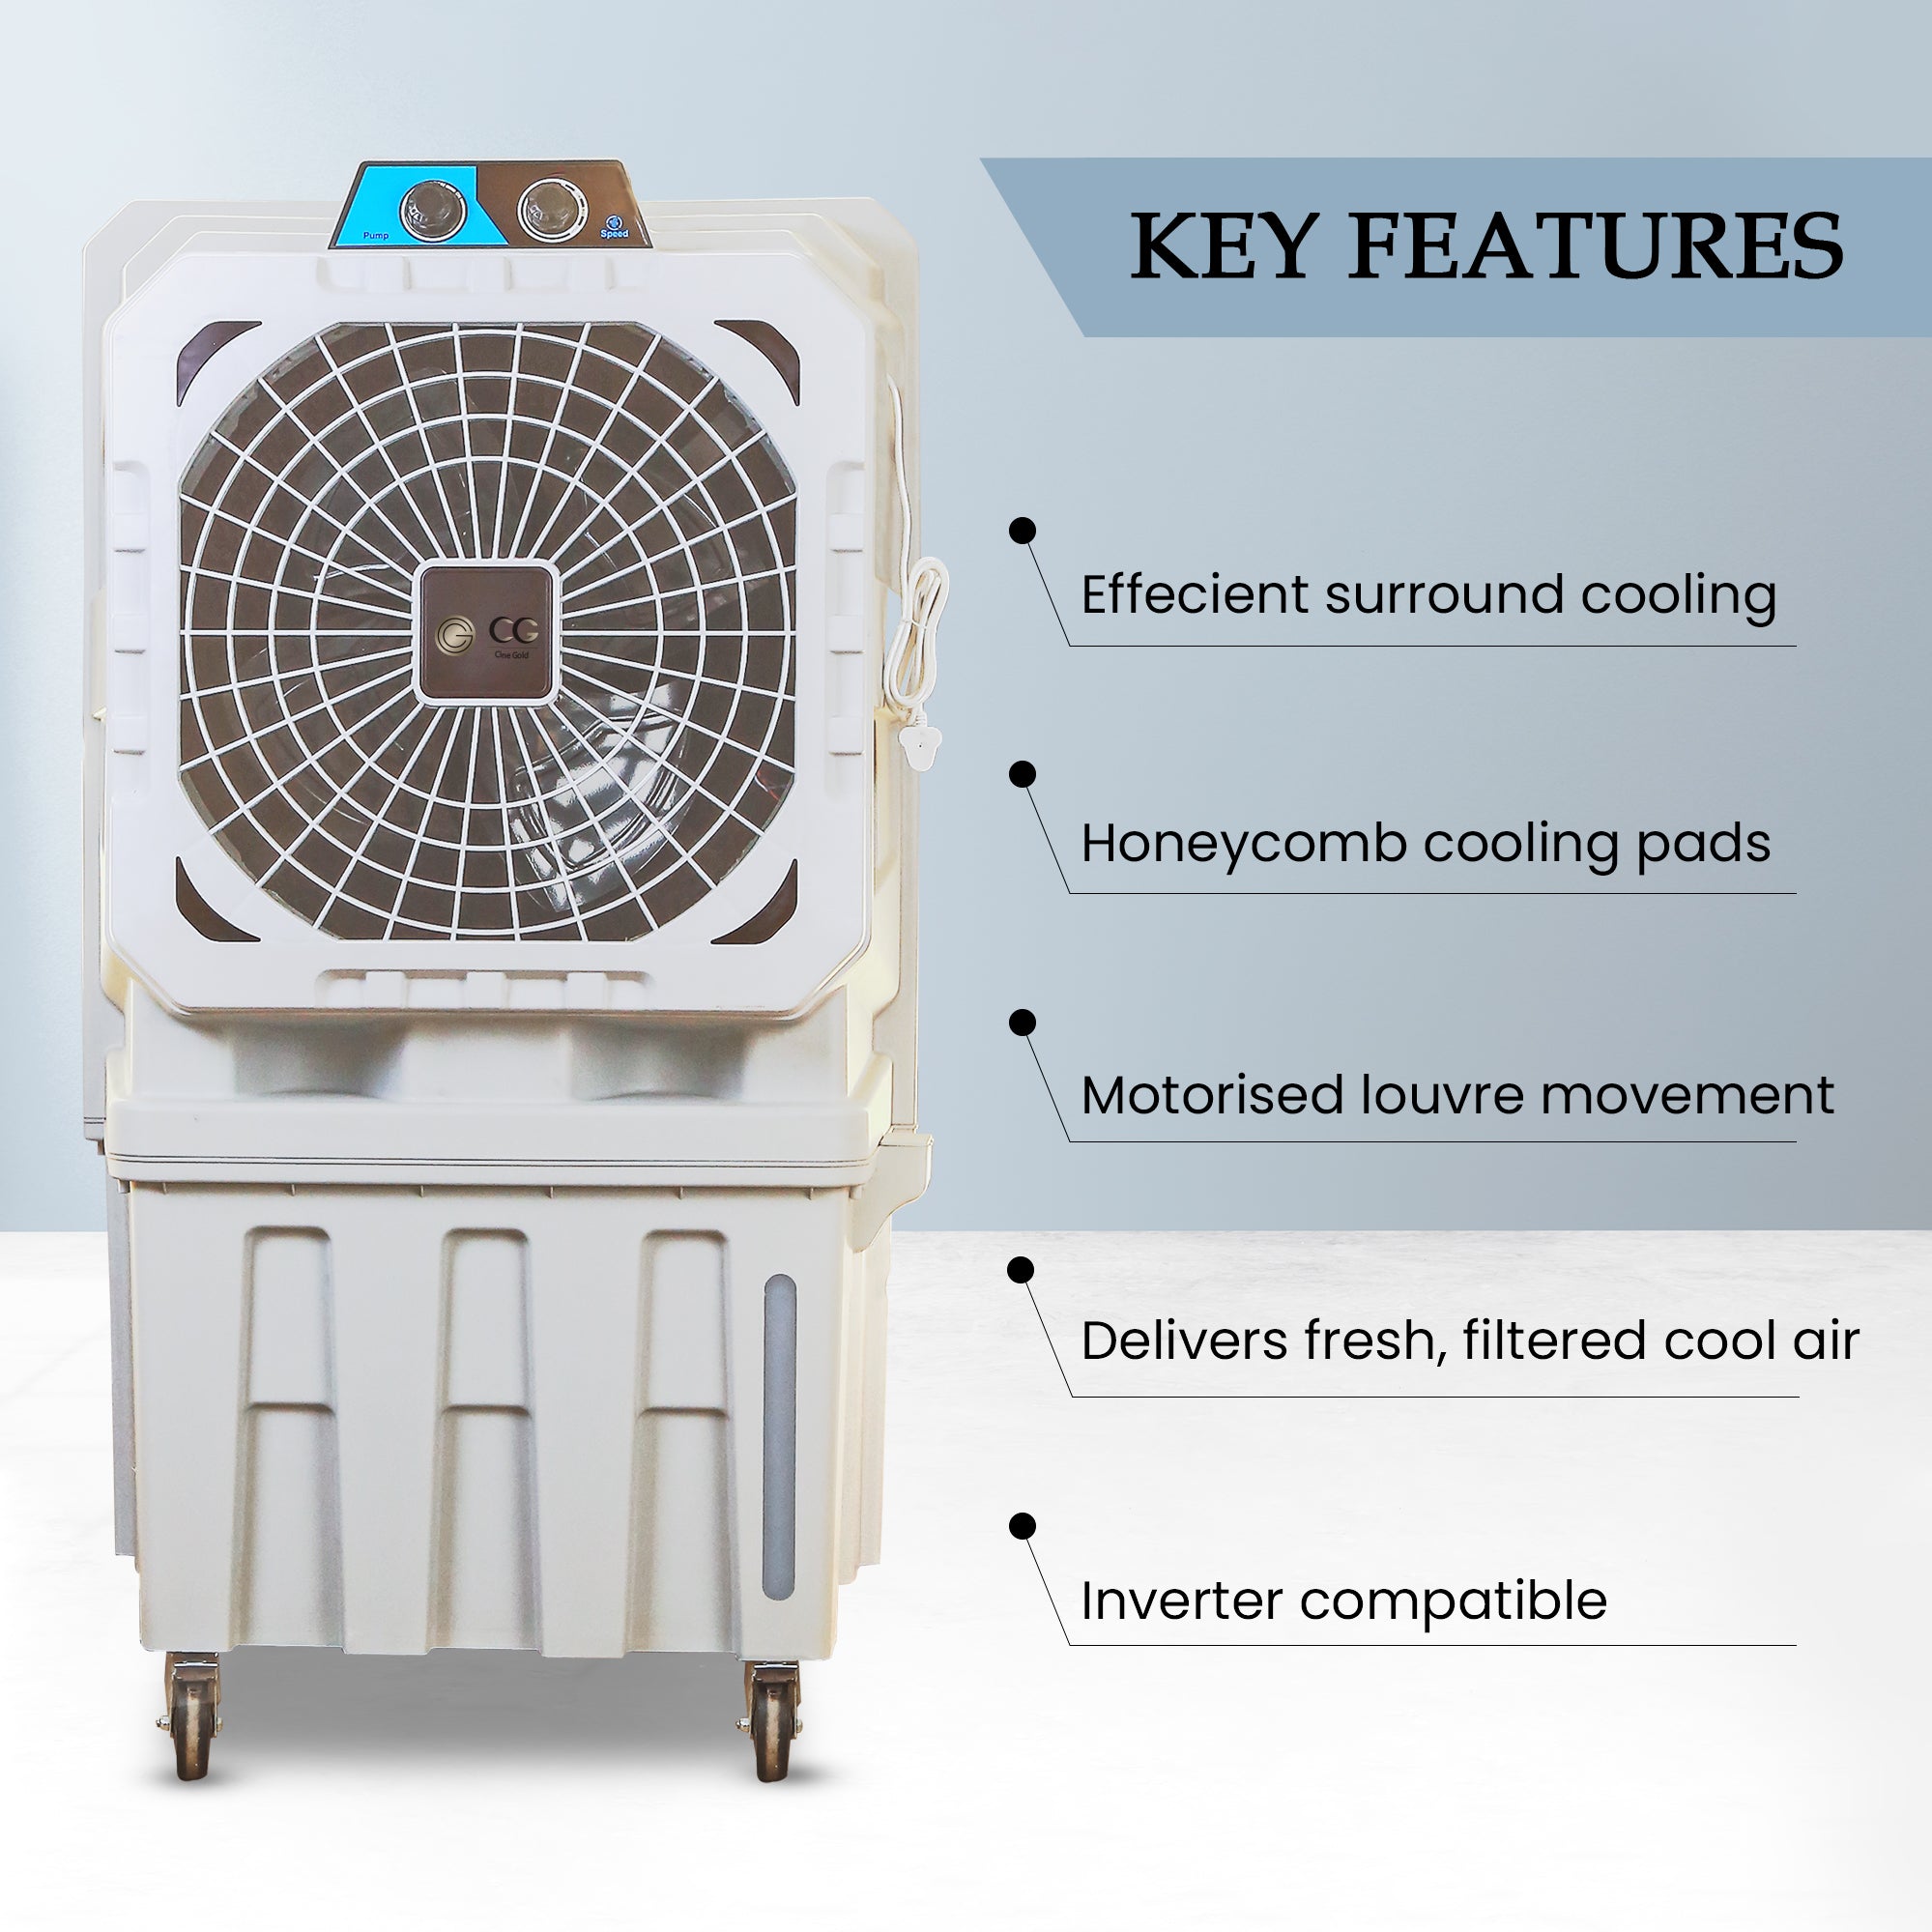 Cine Gold Legender 150 LTR Heavy Duty Desert Air Cooler For Home/Office With Honeycomb Cooling & Auto Swing Technology, Powerful Air Throw & 3-Speed Control Dark Grey